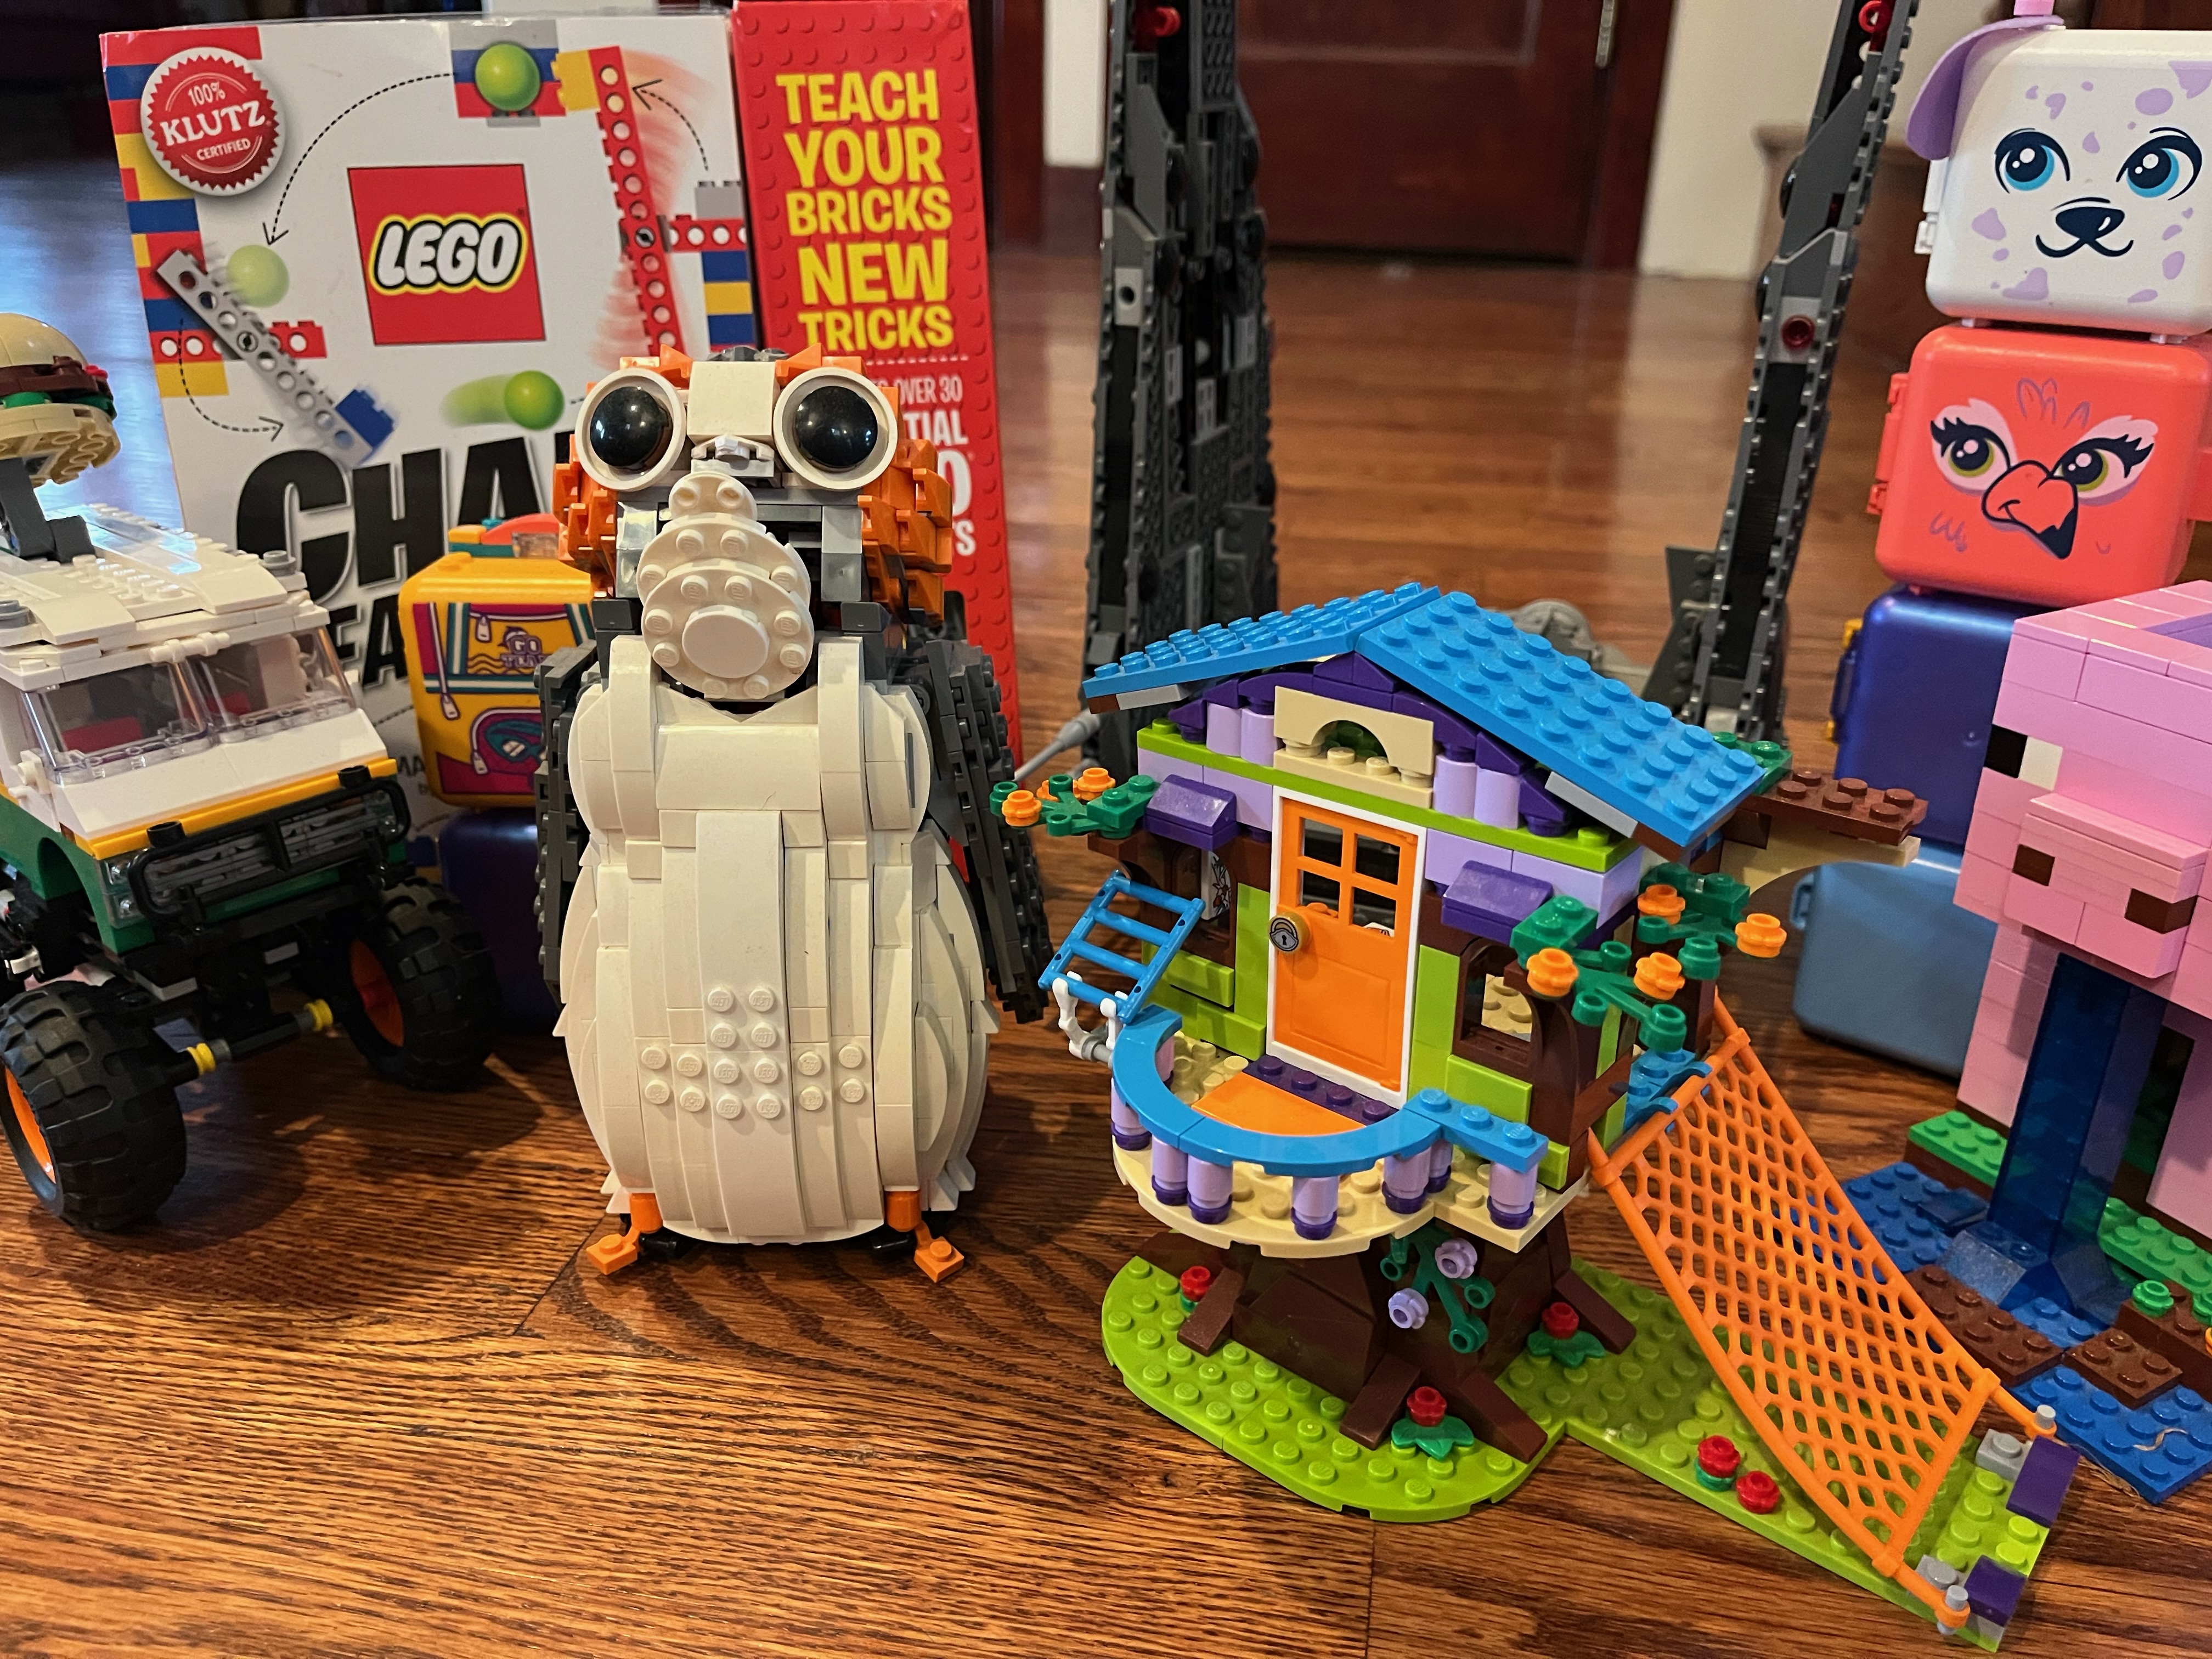 The Best of the LEGO Universe for Kids